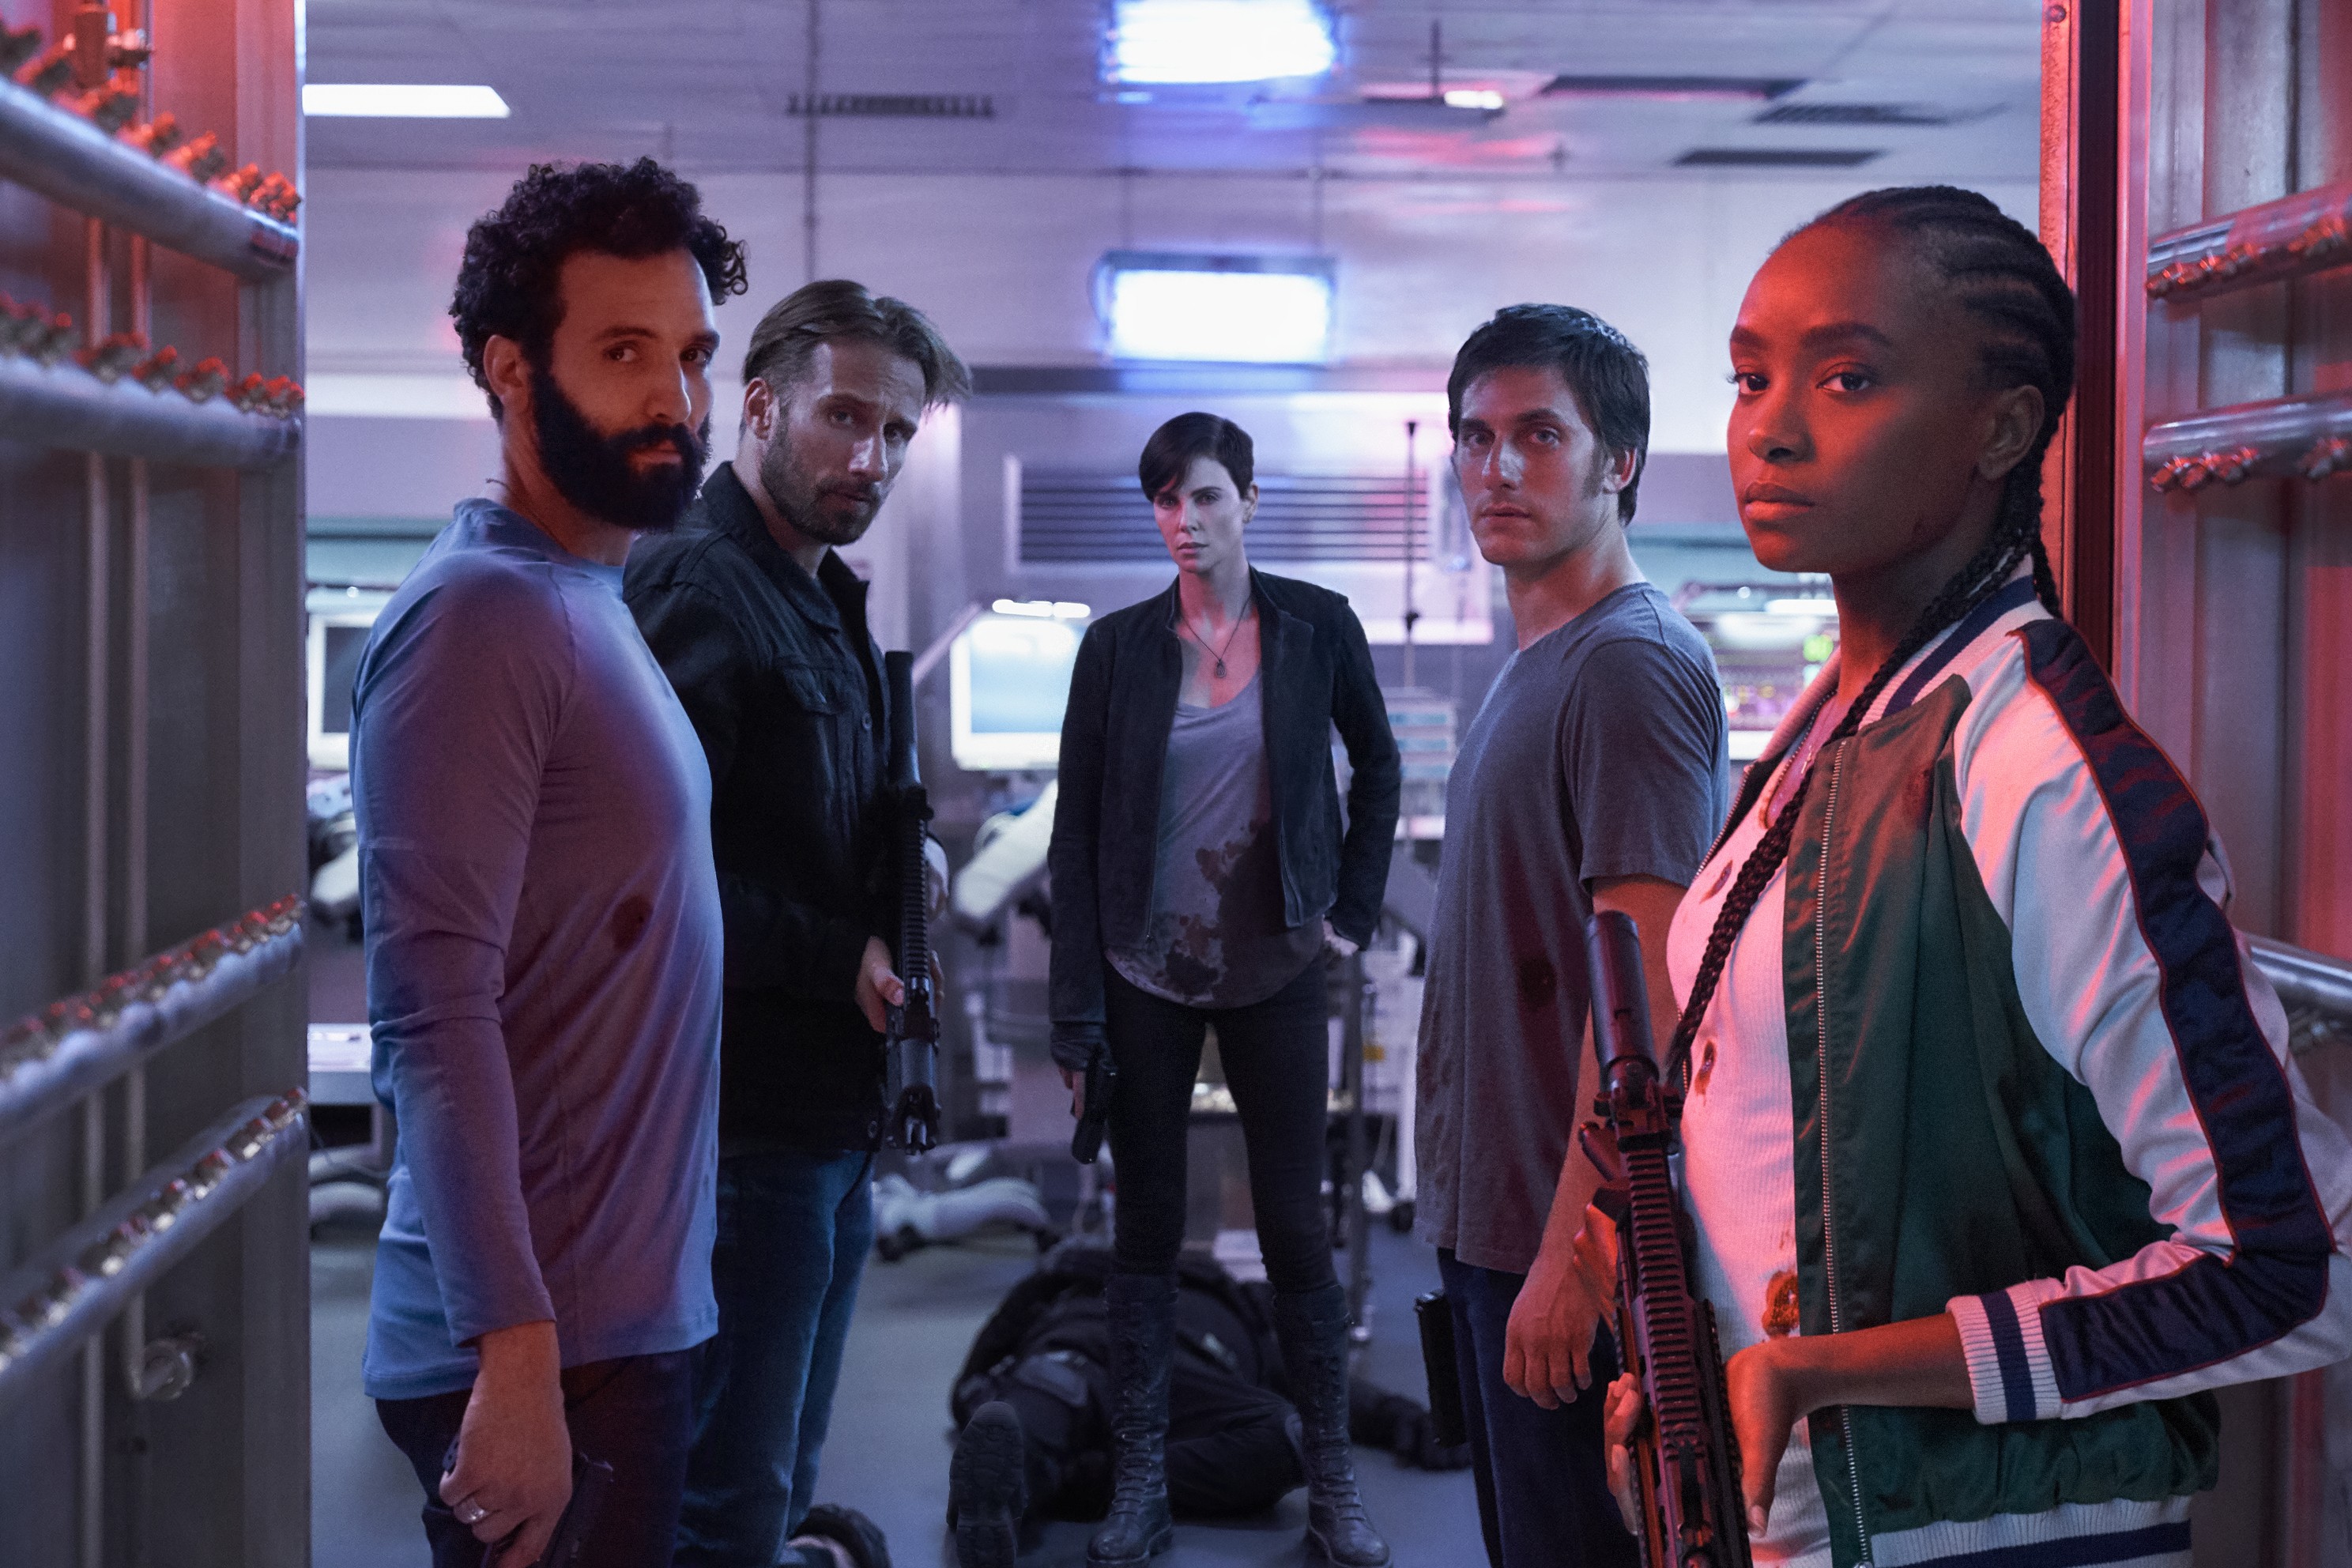 THE OLD GUARD (2020) -  (L to R) Marwan Kenzari as Joe,  Matthias Schoenaerts as Booker, Charlize Theron as Andy,  Luca Marinelli as Nicky, Kiki Layne as Nile. Photo Credit: AIMEE SPINKS/NETFLIX  (Foto: AIMEE SPINKS/NETFLIX)